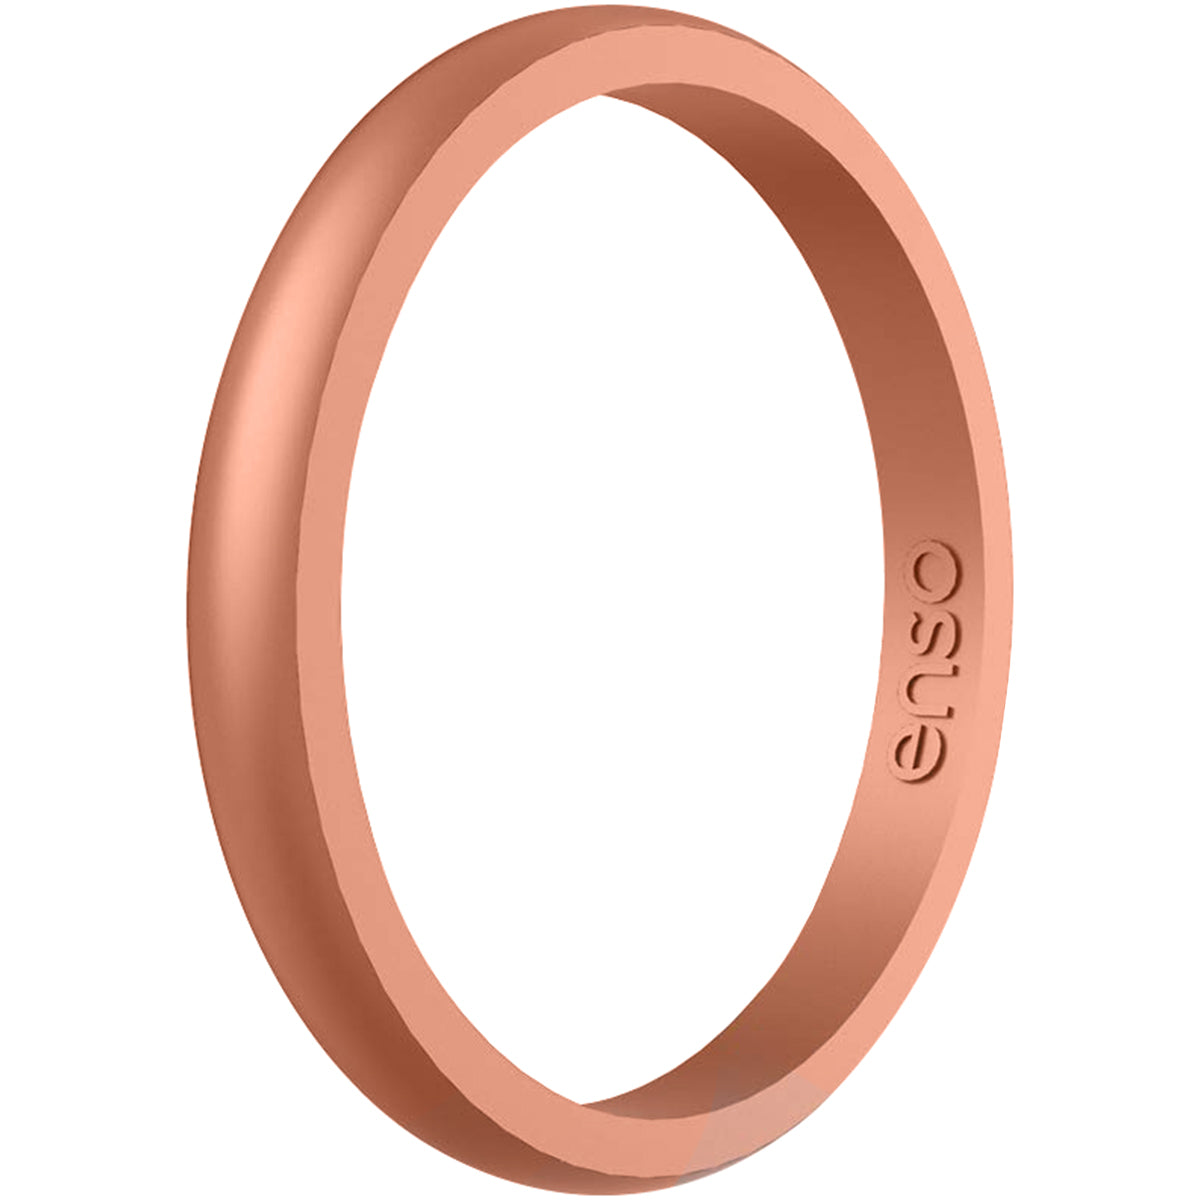 Enso Rings Halo Elements Series Silicone Ring - Copper Enso Rings